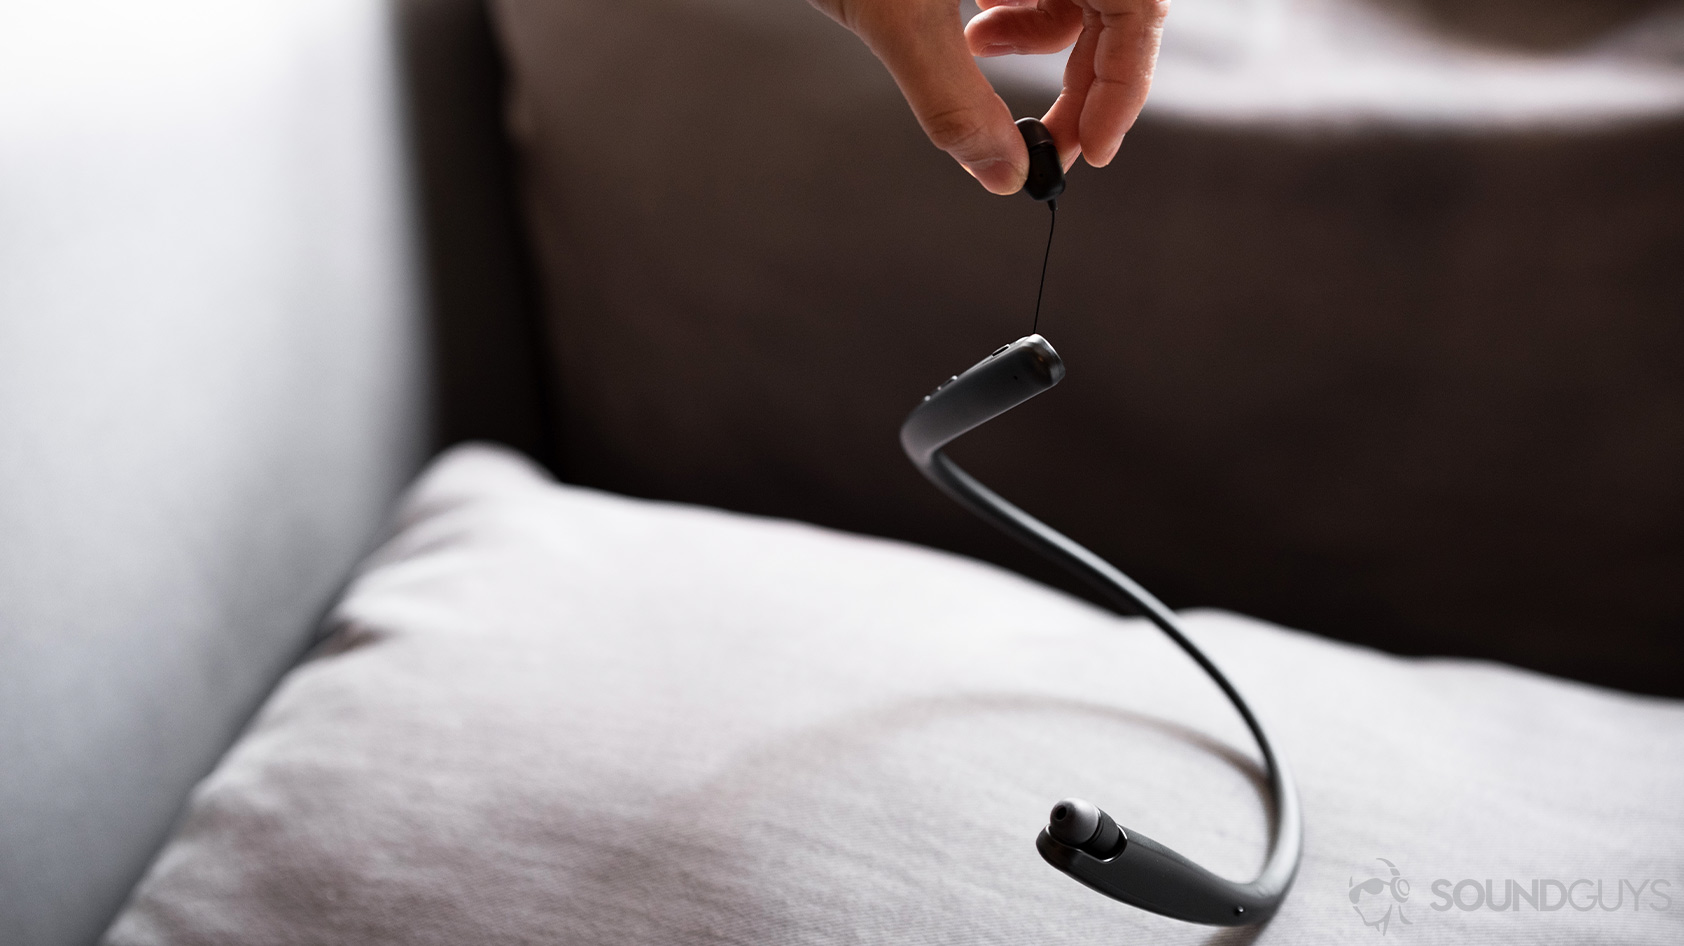 The LG Tone Style SL6s earbuds being suspended to show the thinness of the cable.